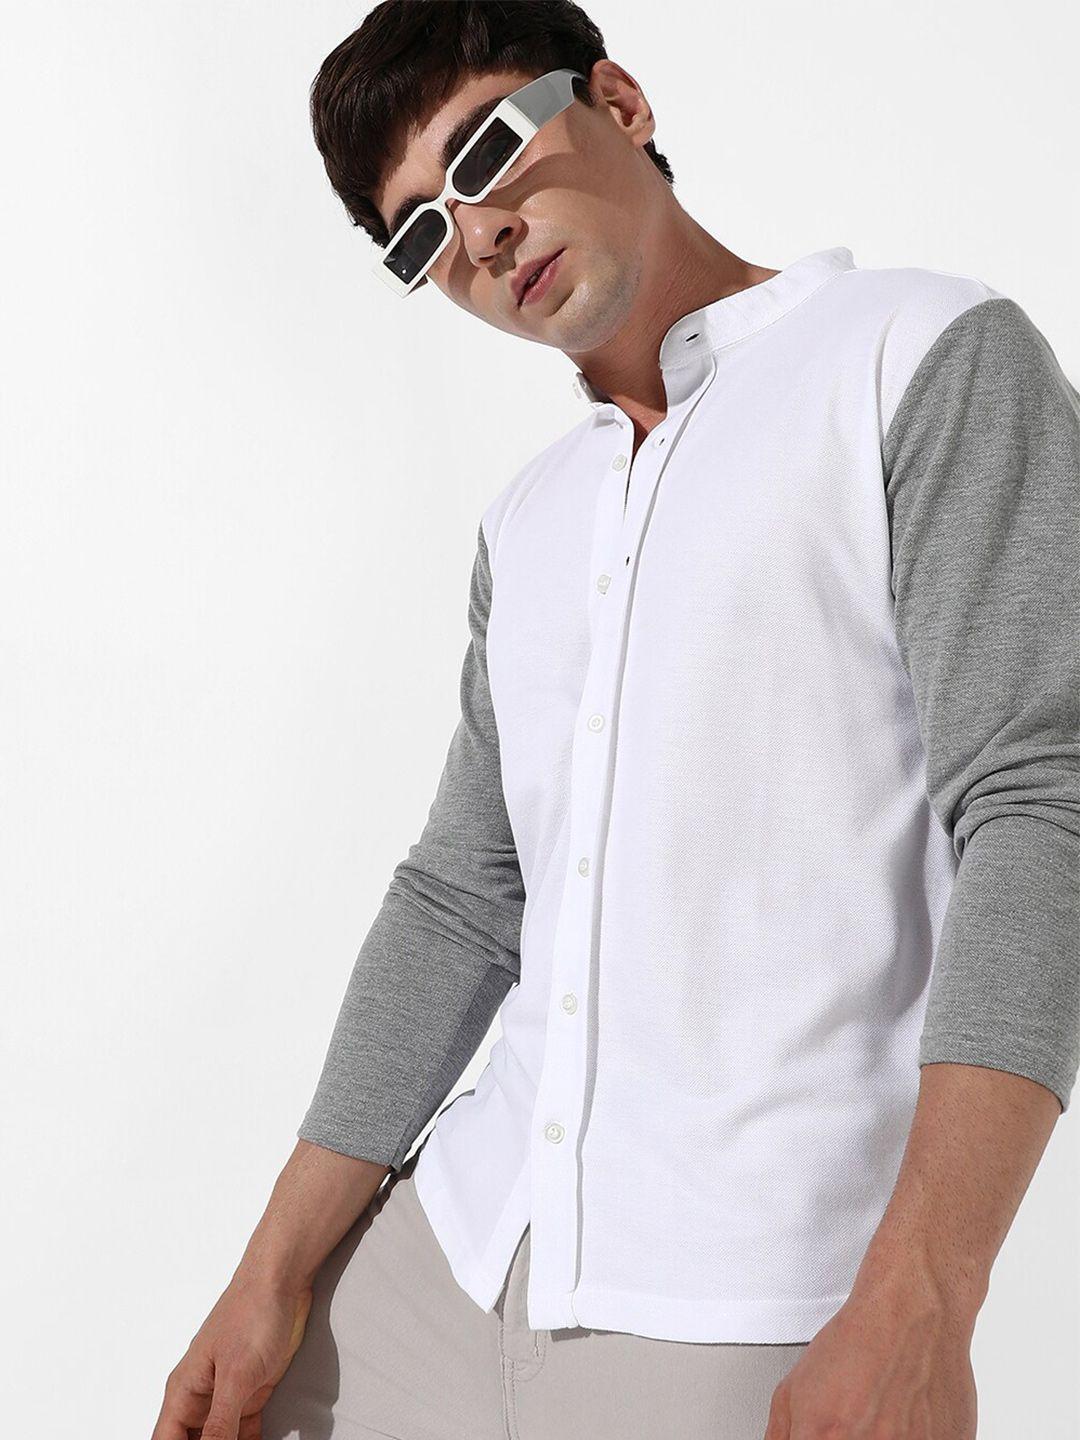 campus sutra grey & white colourblocked classic fit cotton casual shirt